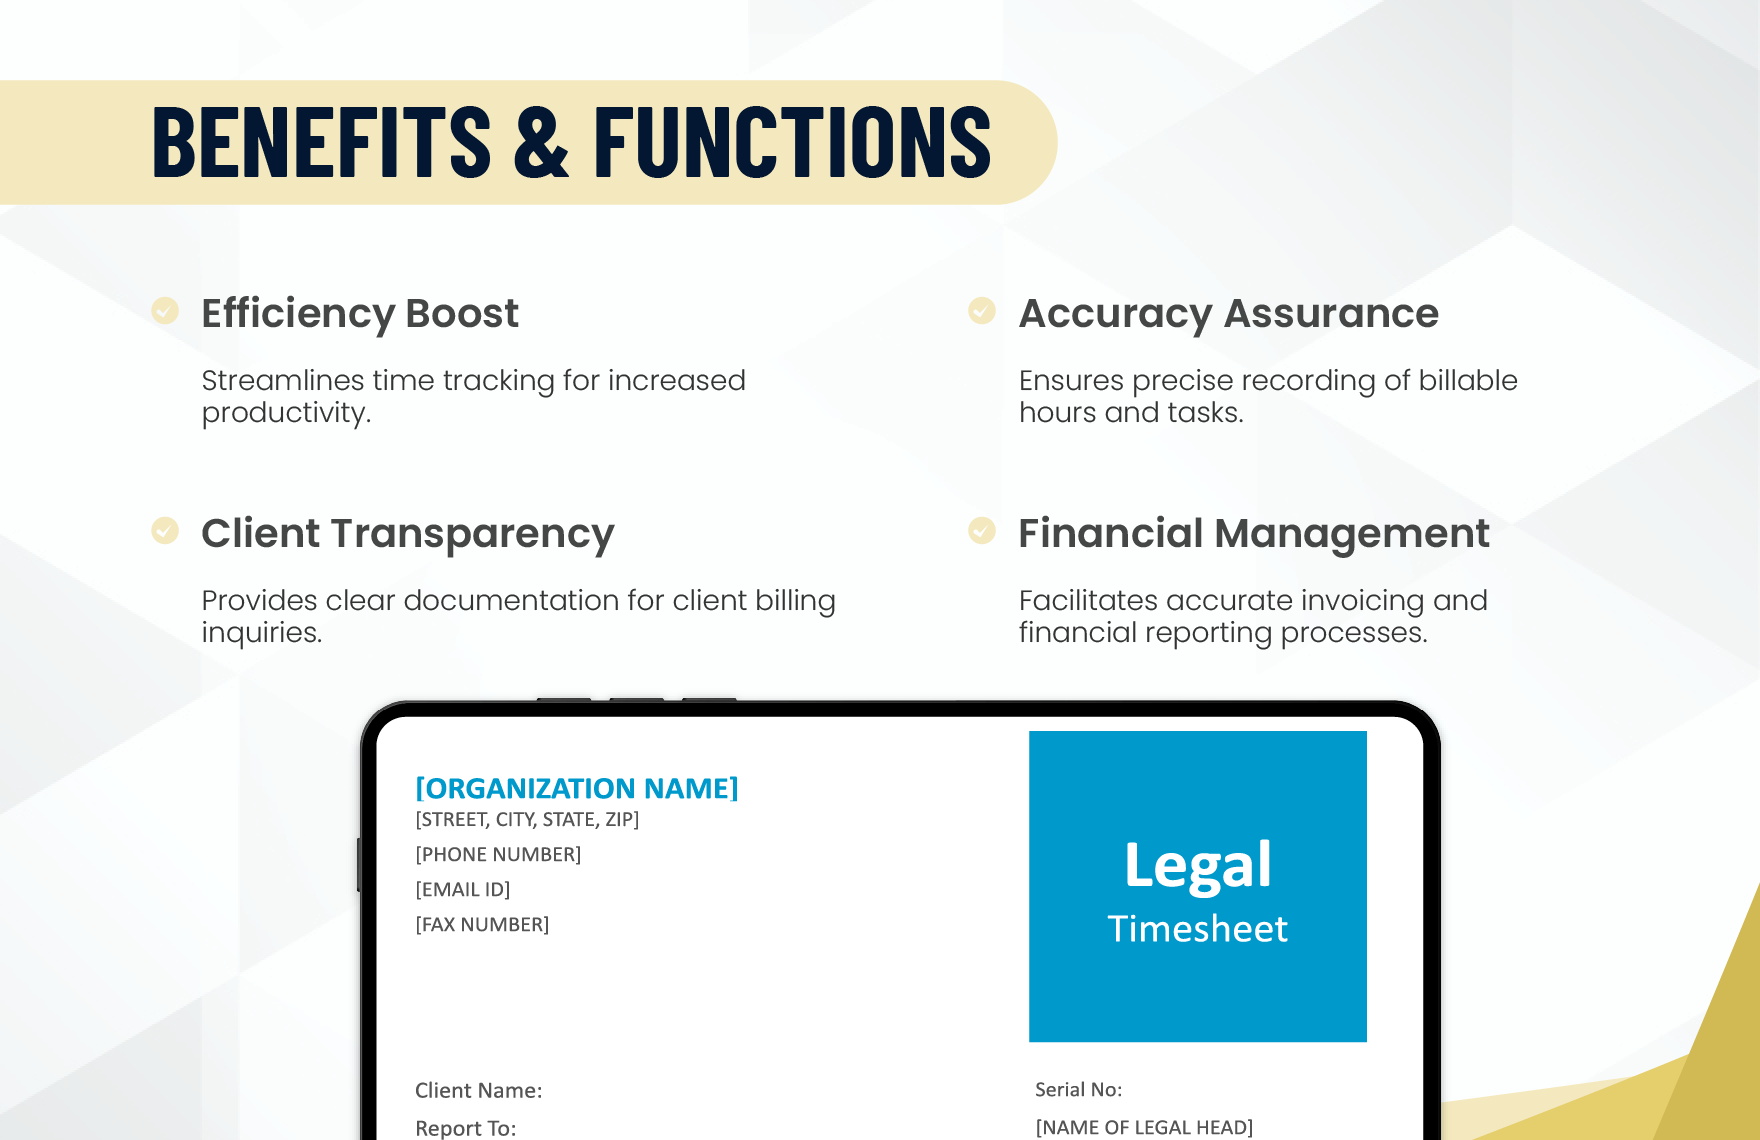 Sample Legal and Lawyer Timesheet Template